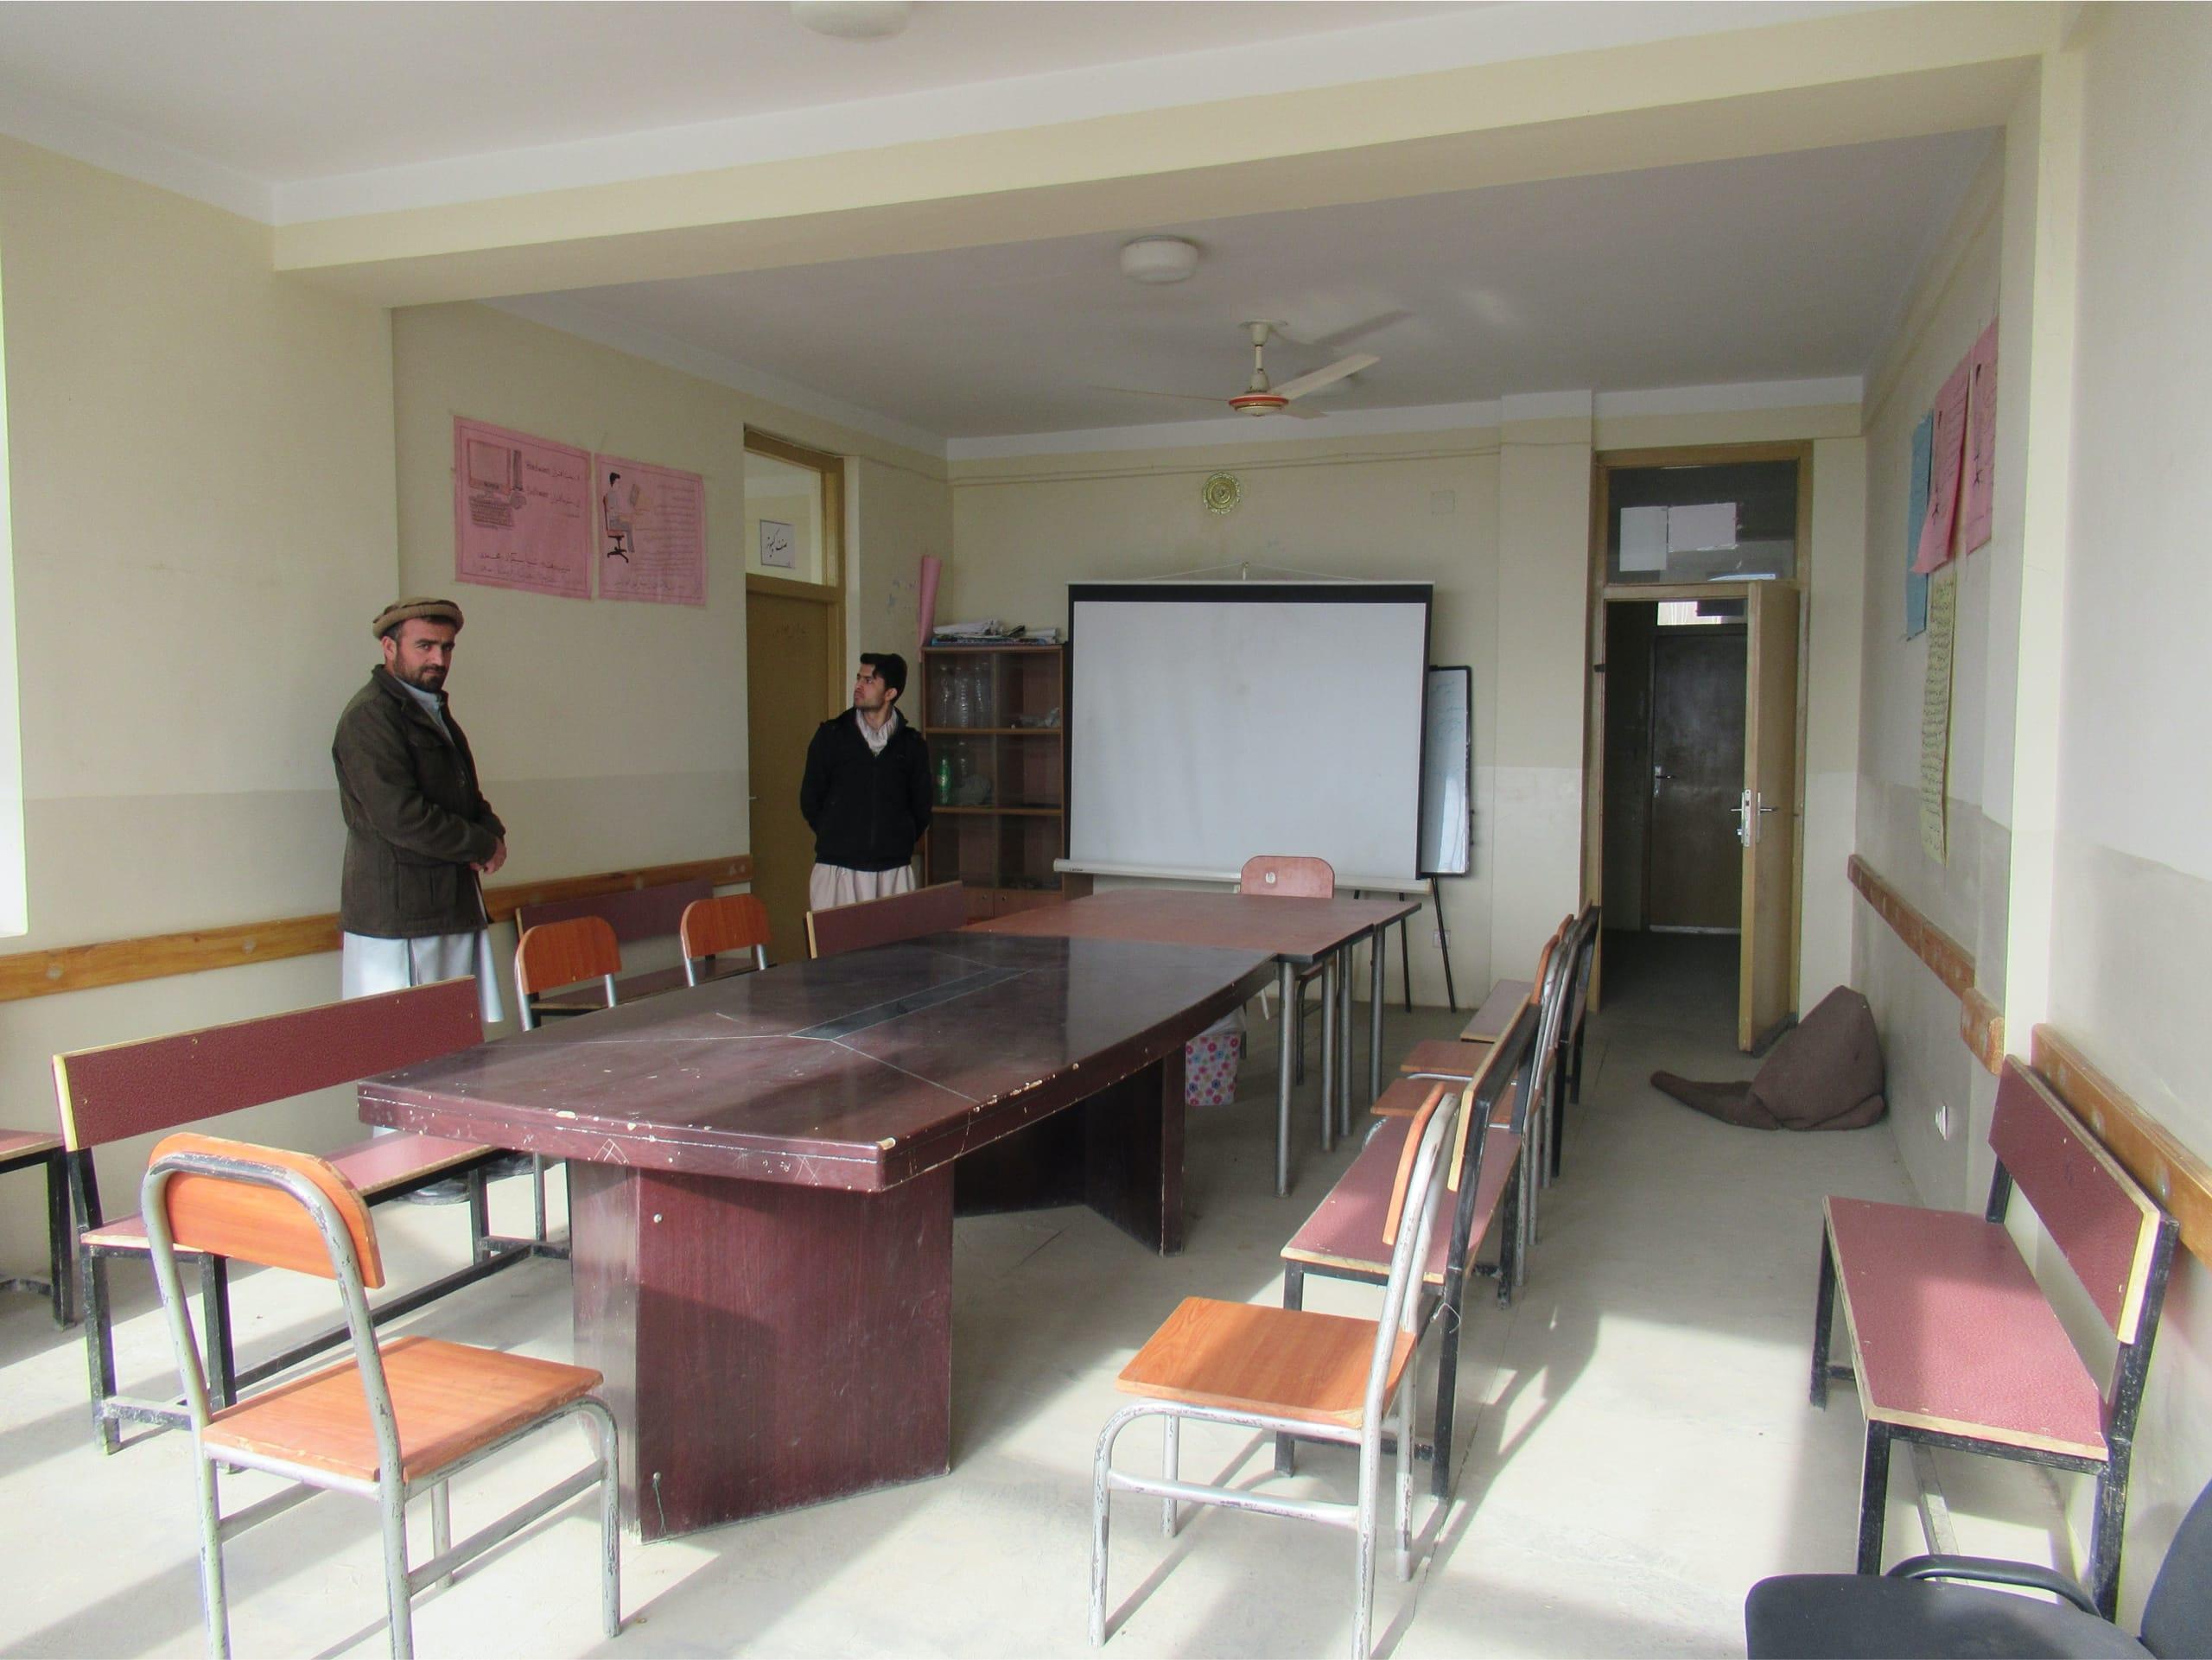 This classroom is equipped with a fan and a projector, allowing the students to learn most effectively.